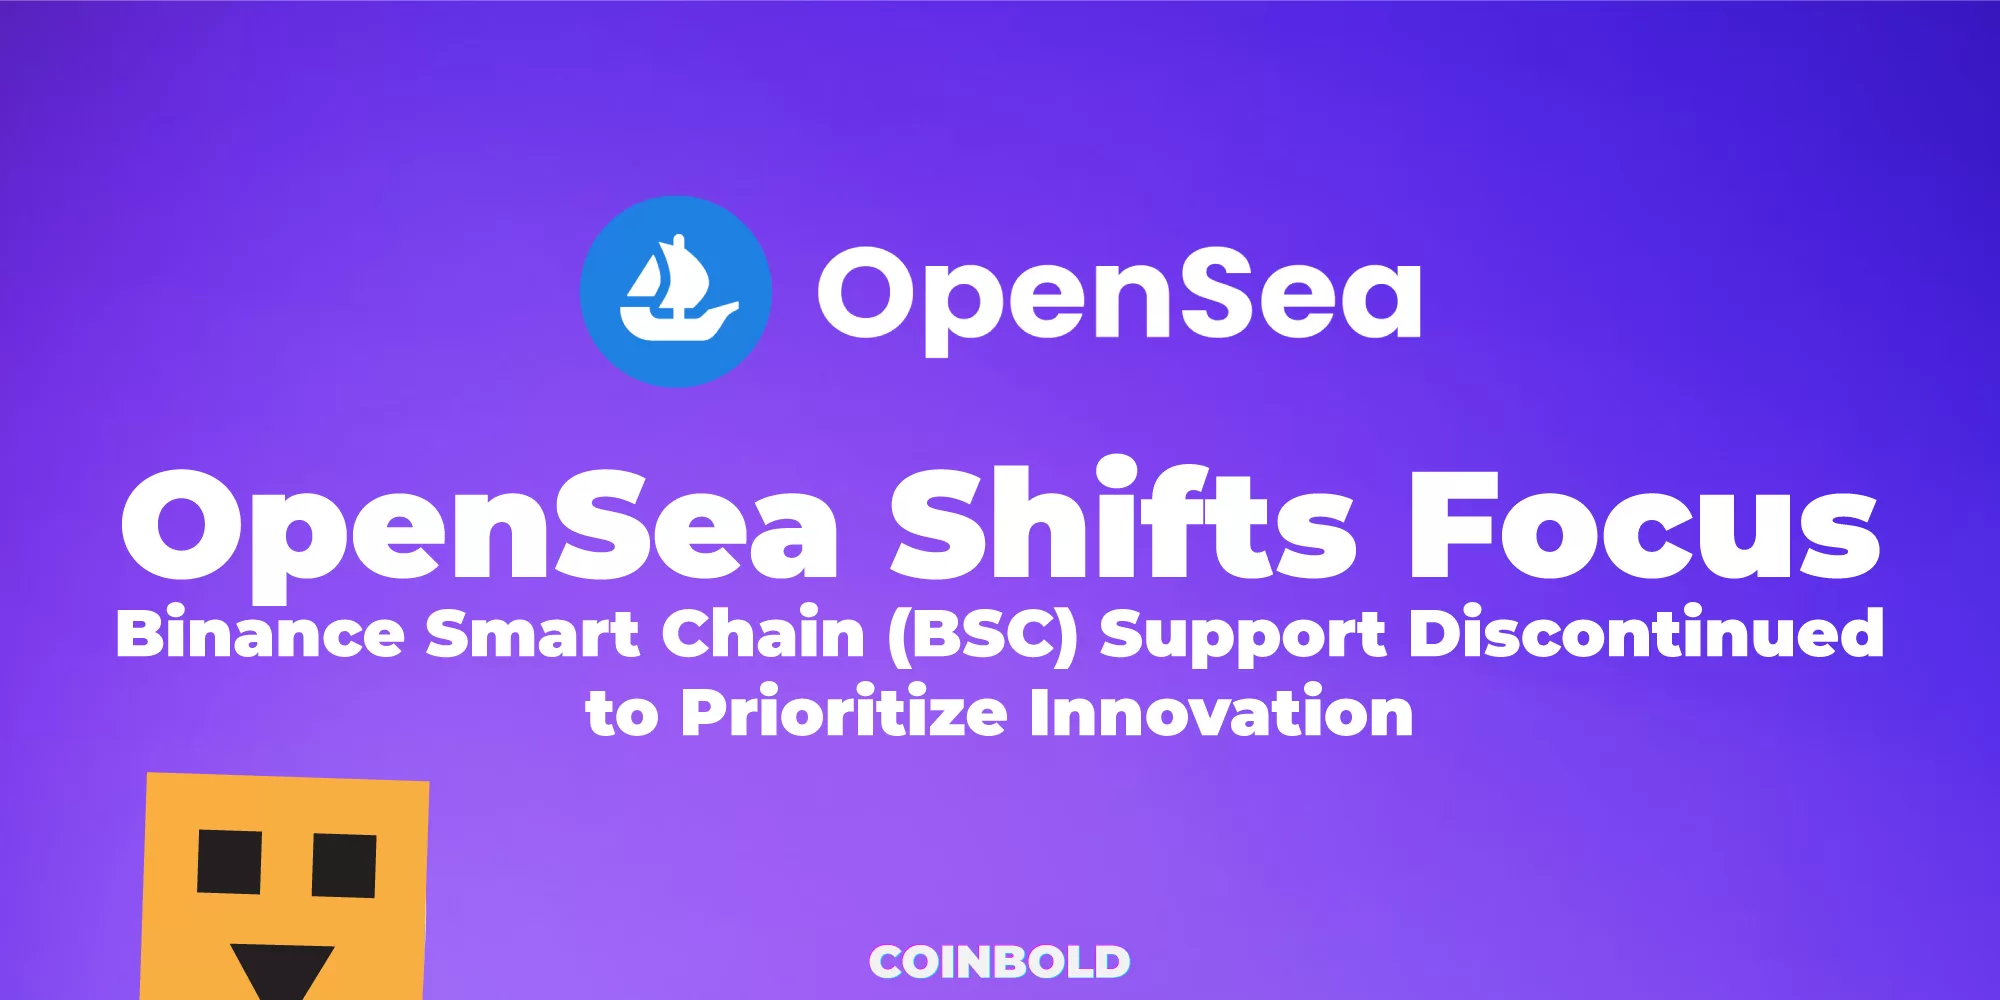 OpenSea Shifts Focus Binance Smart Chain (BSC) Support Discontinued to Prioritize Innovation